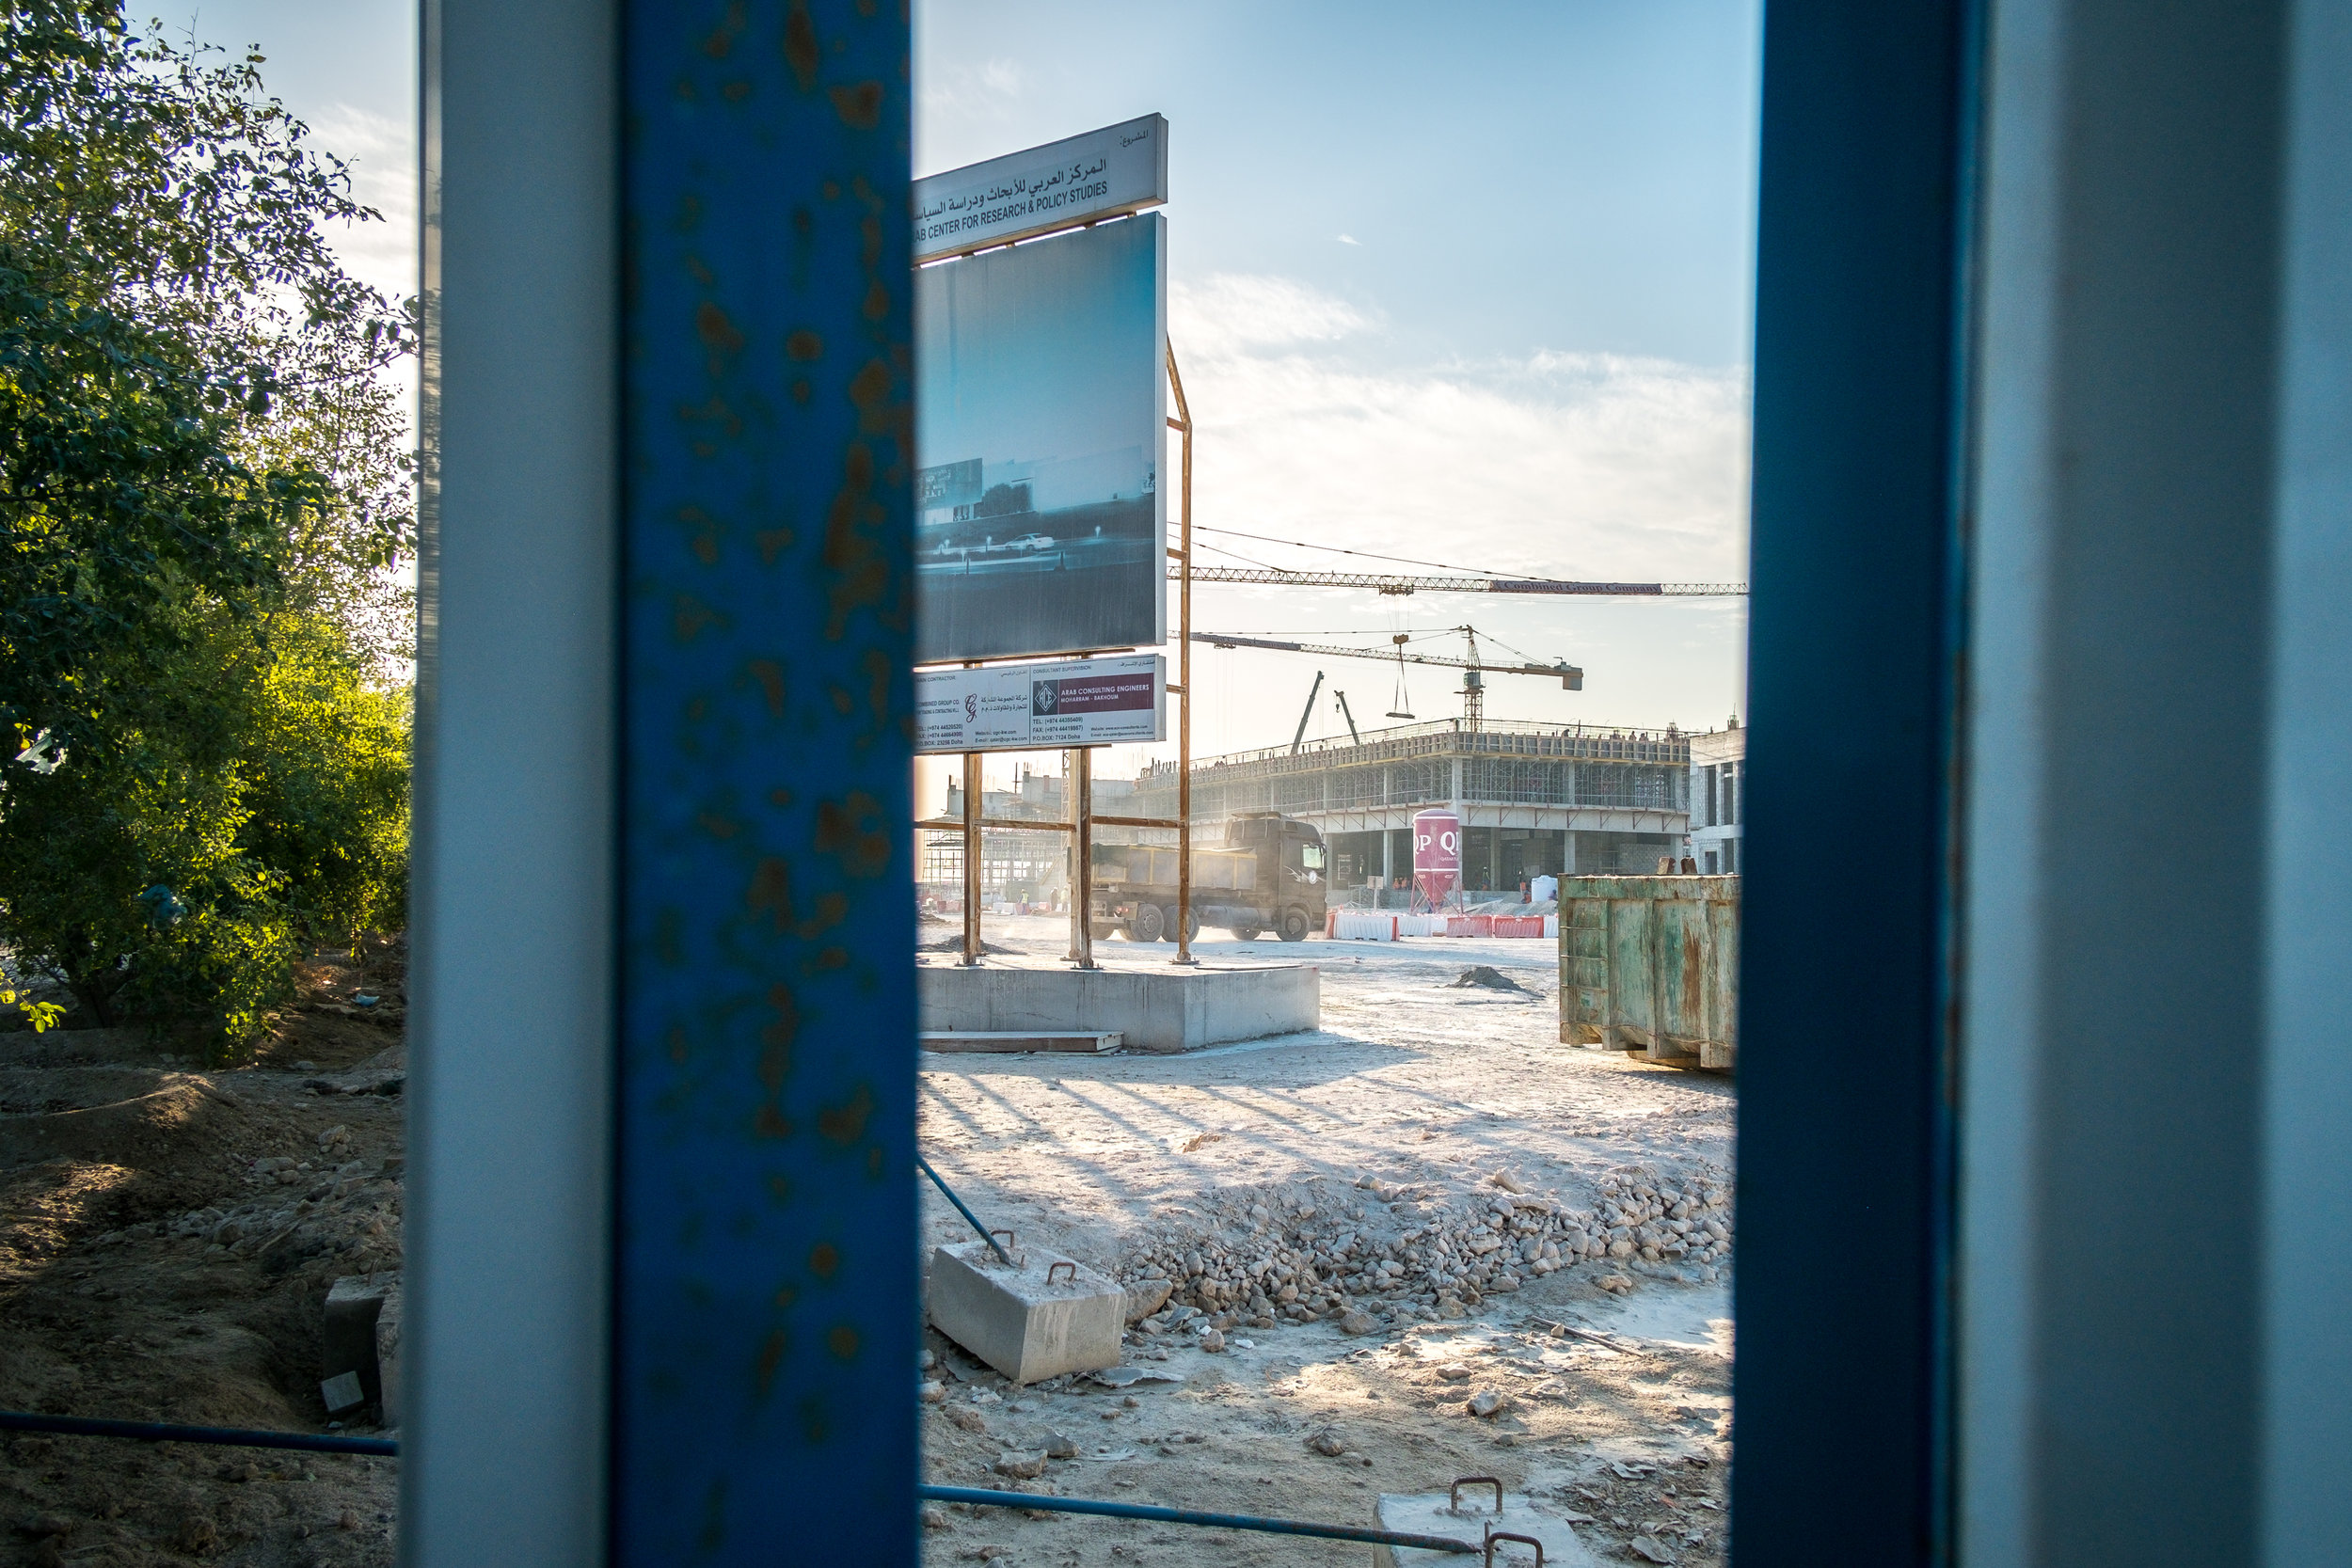  A construction site for the Arab Center for Research and Policy Studies is seen through a crack in the partition. 